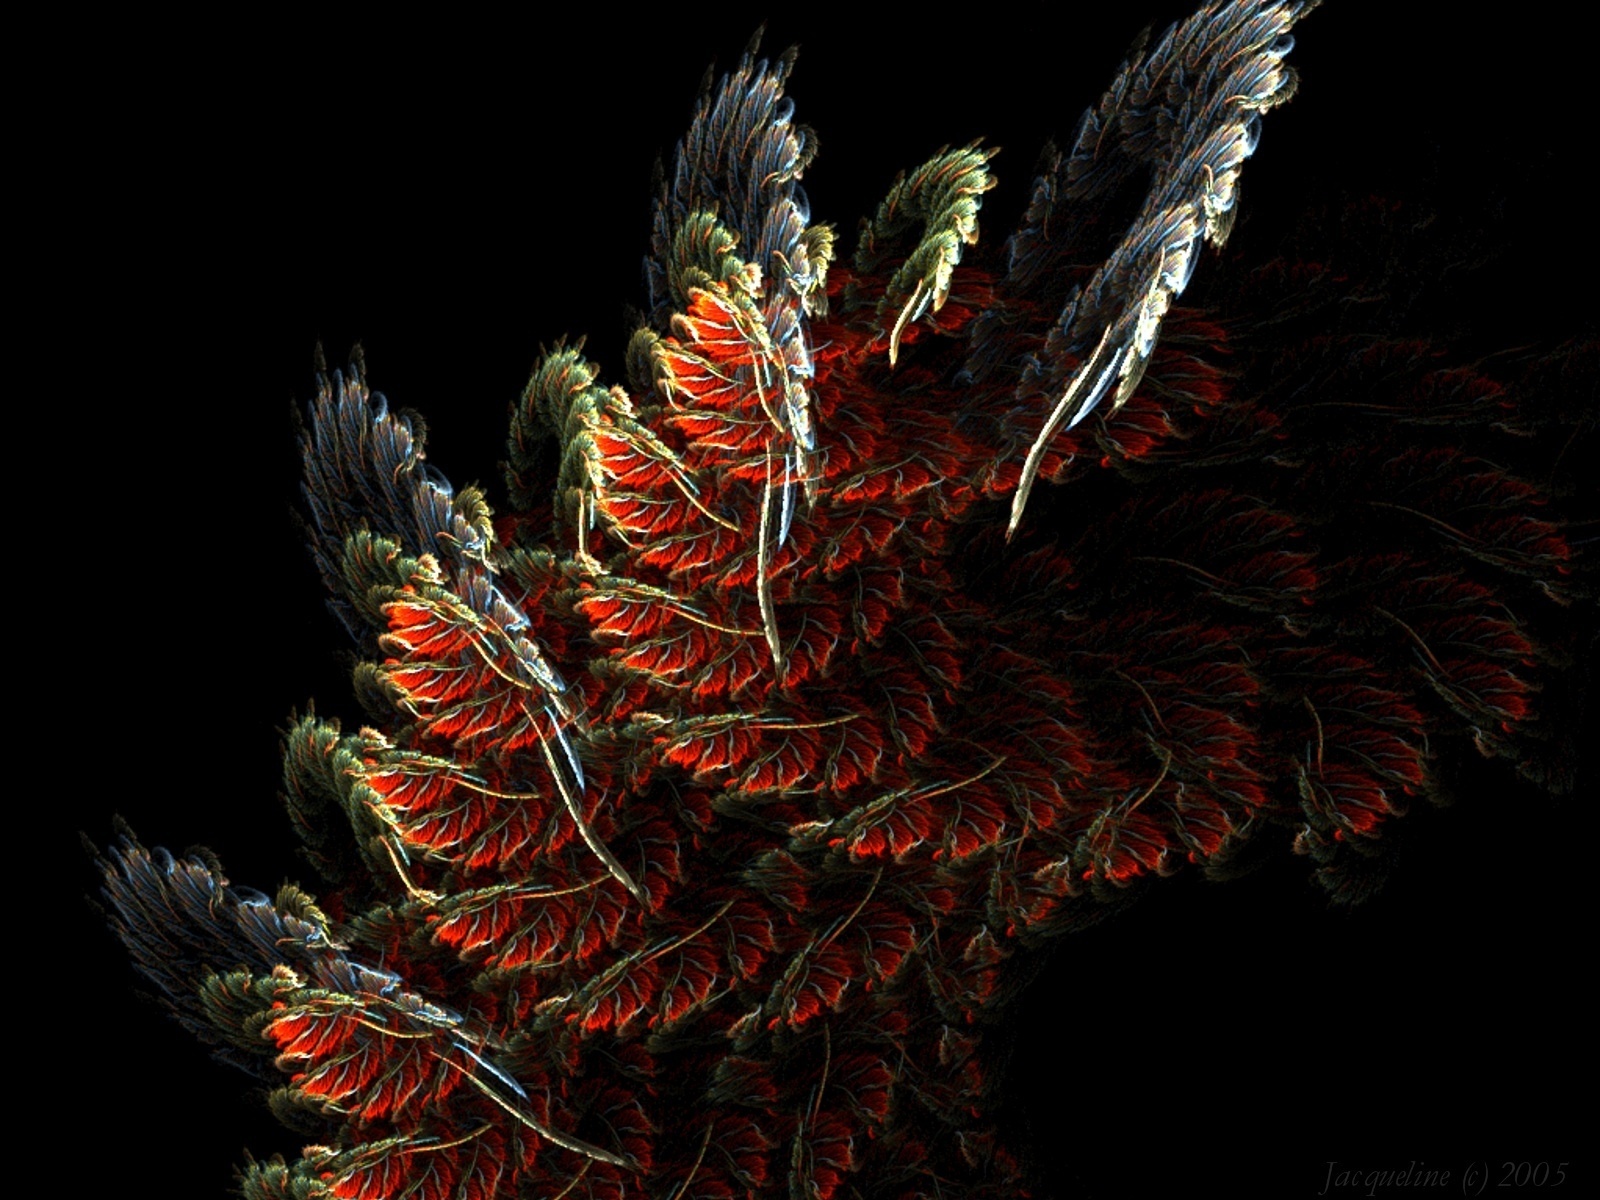 Red Coral Art - ID: 25517 - Art Abyss